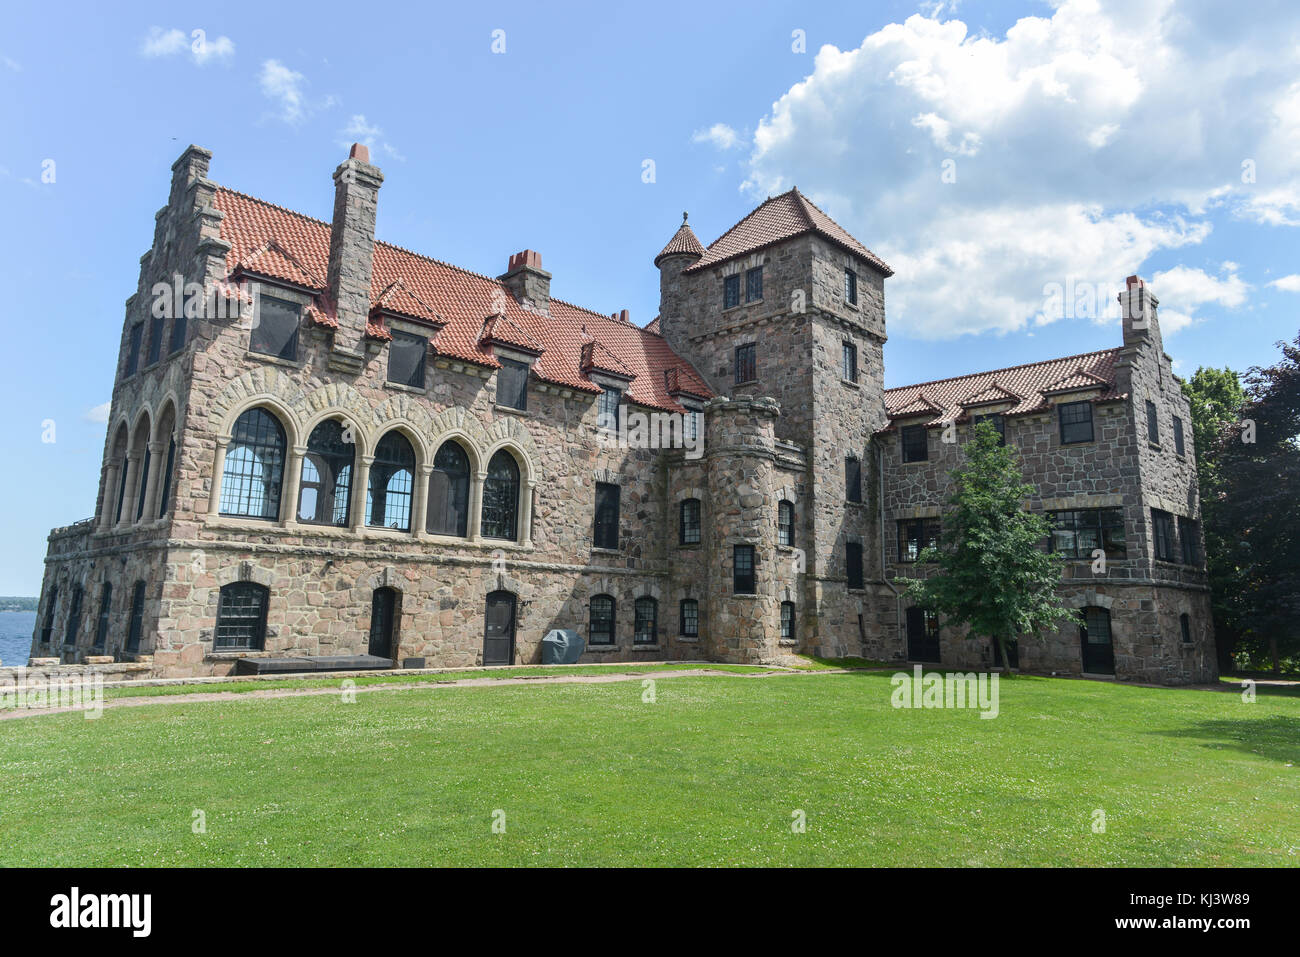 Singer Castle located on Dark Island in the St. Lawrence Seaway, New York, USA. Stock Photo